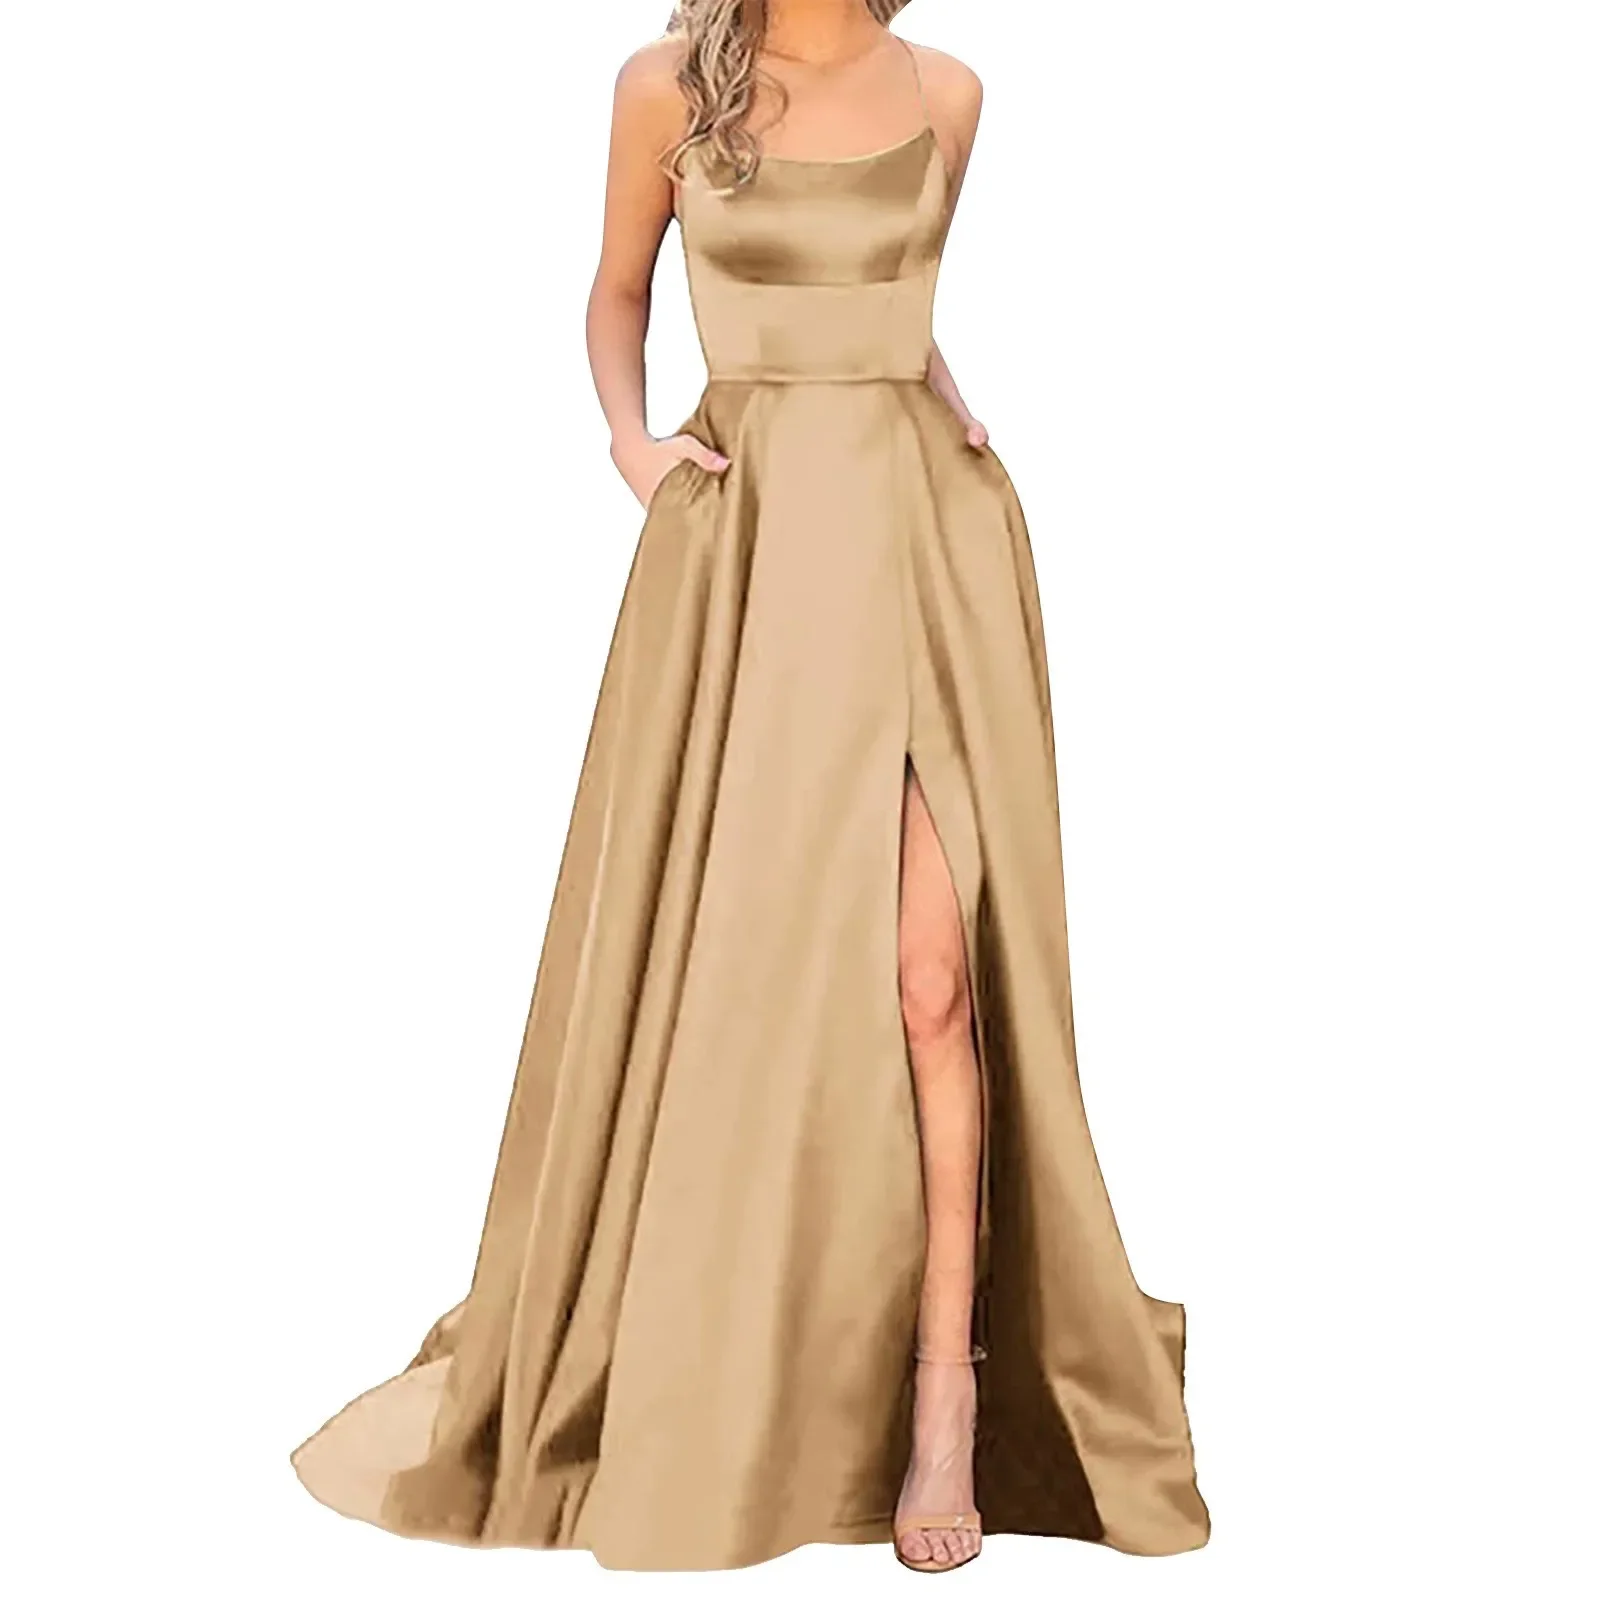 

Minimalist women's evening gown, wedding gown, available in multiple colors